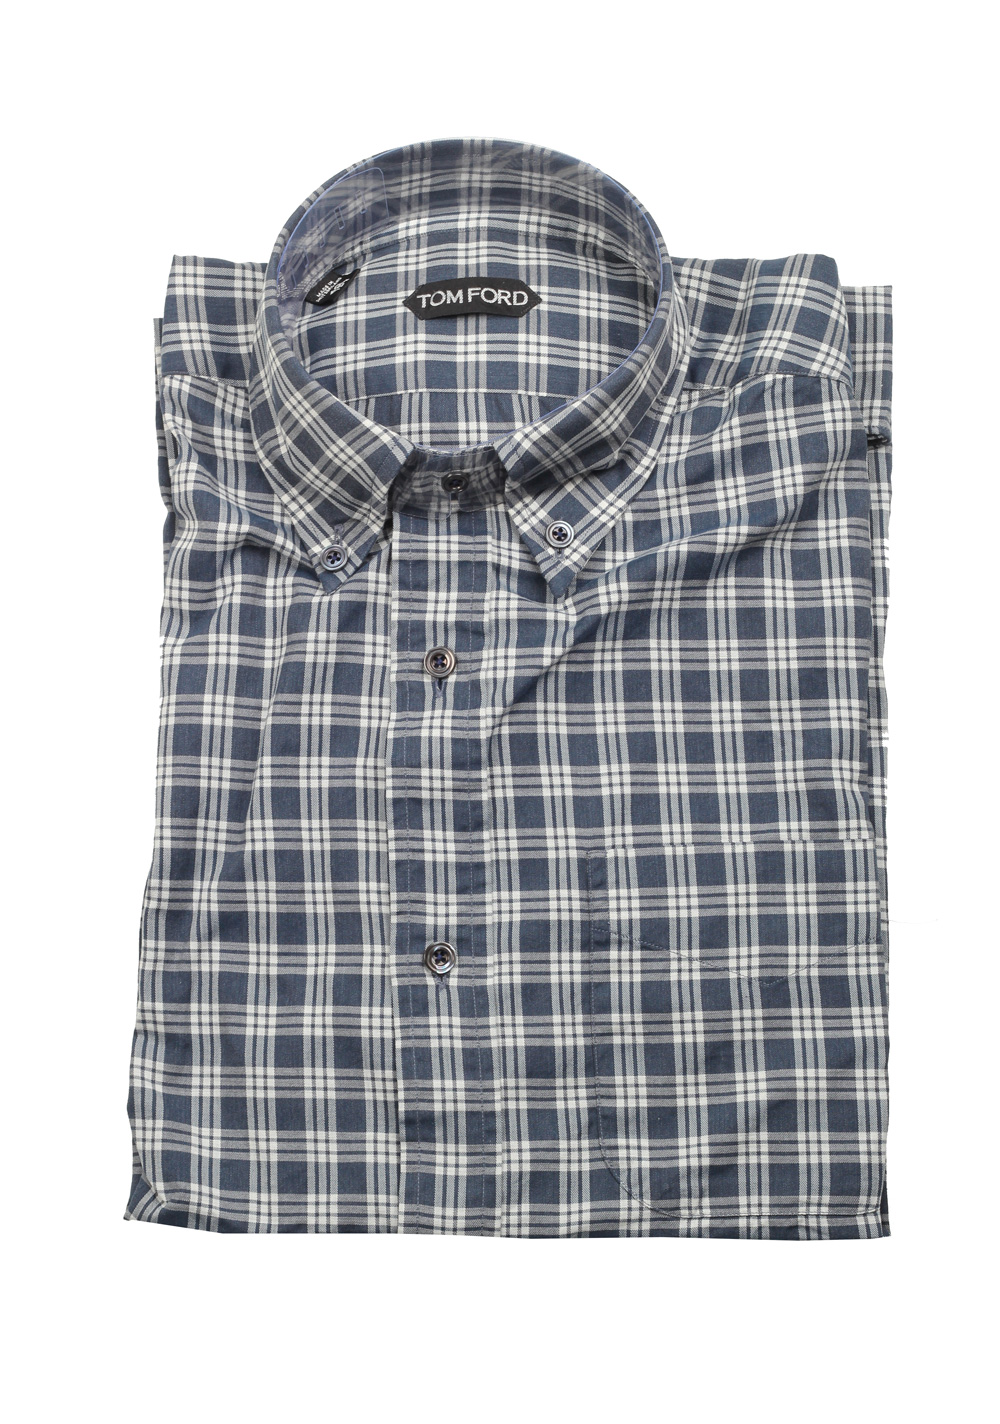 TOM FORD Checked White Blue Button Down Dress Shirt Size 40 / 15,75 . |  Costume